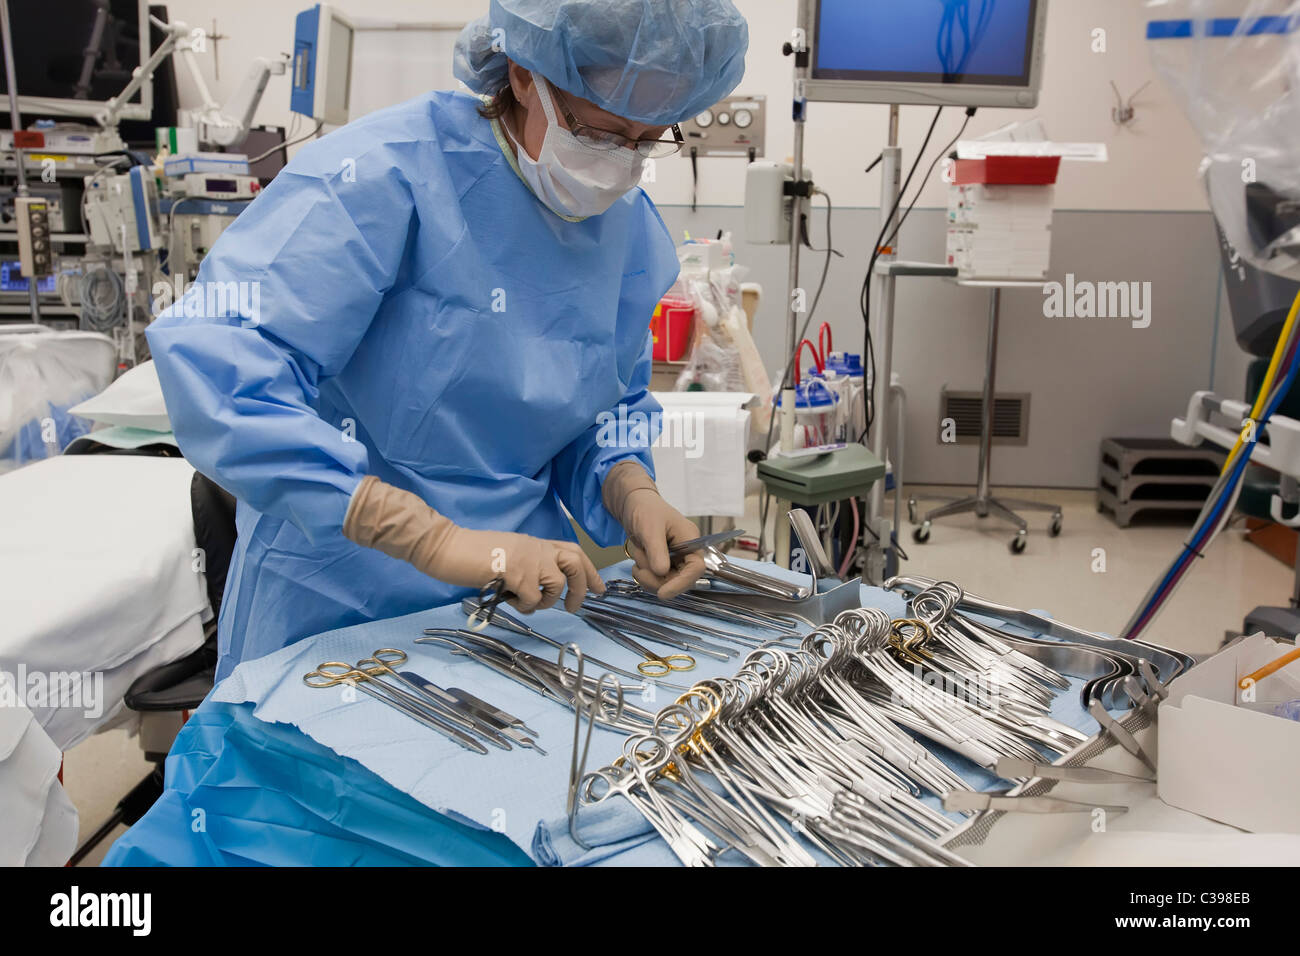 Detroit, Michigan - A nurse prepares surgical tools for an operation at St. John Hospital. Stock Photo